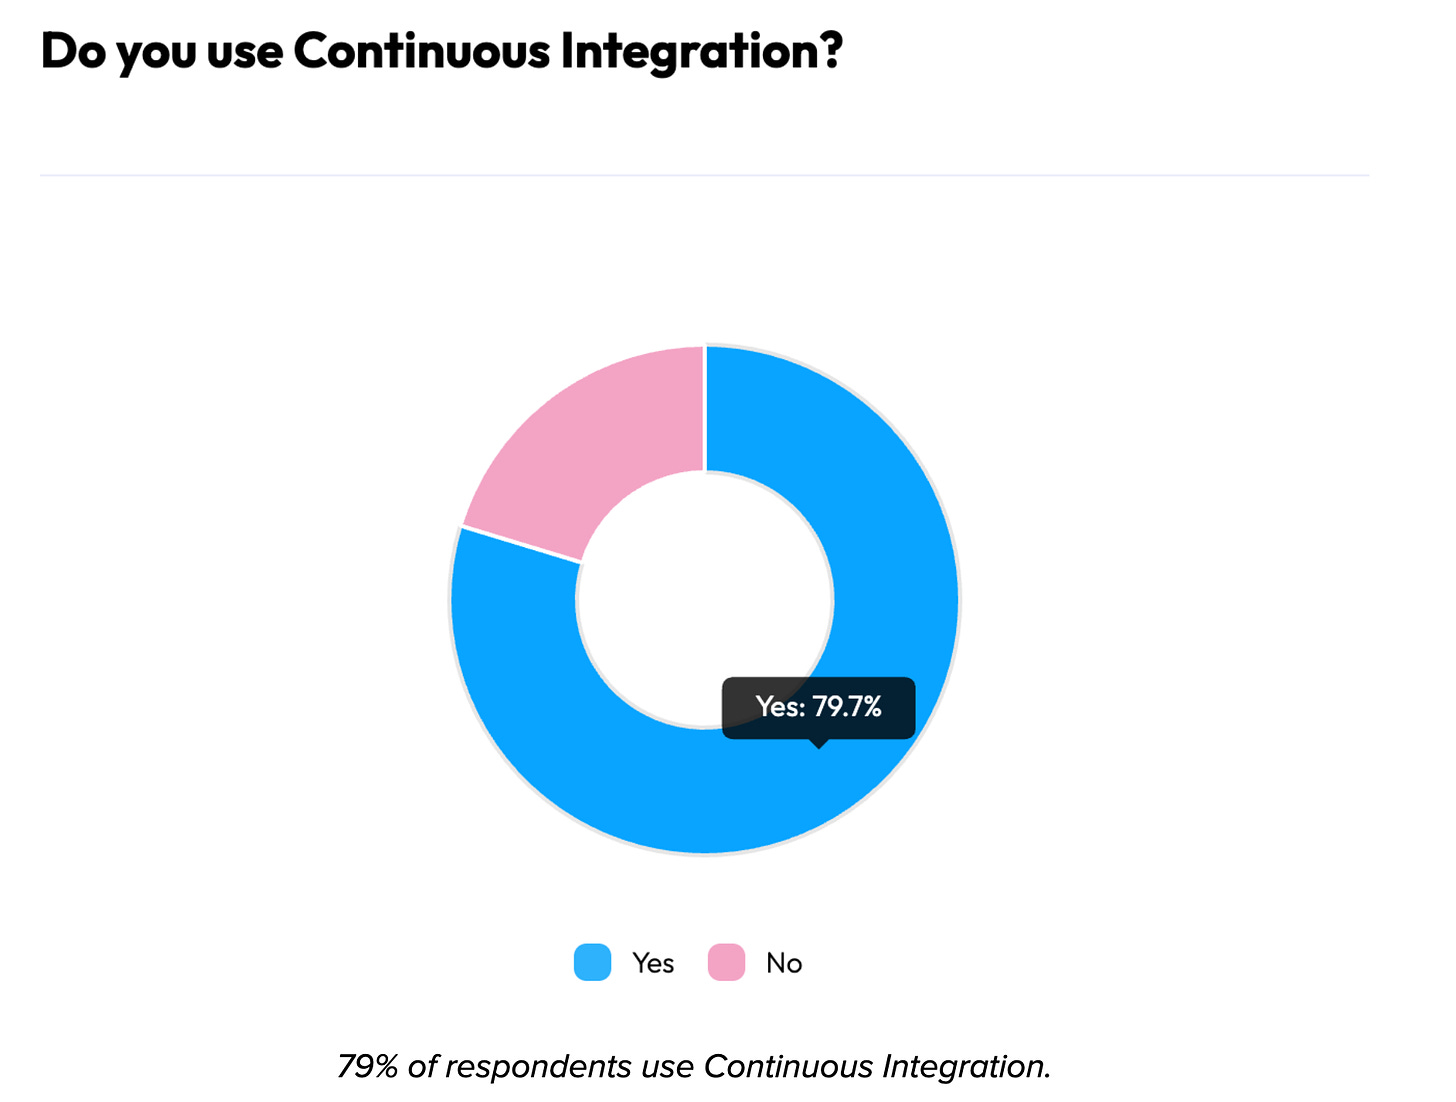 79% of respondents use Continuous Integration.